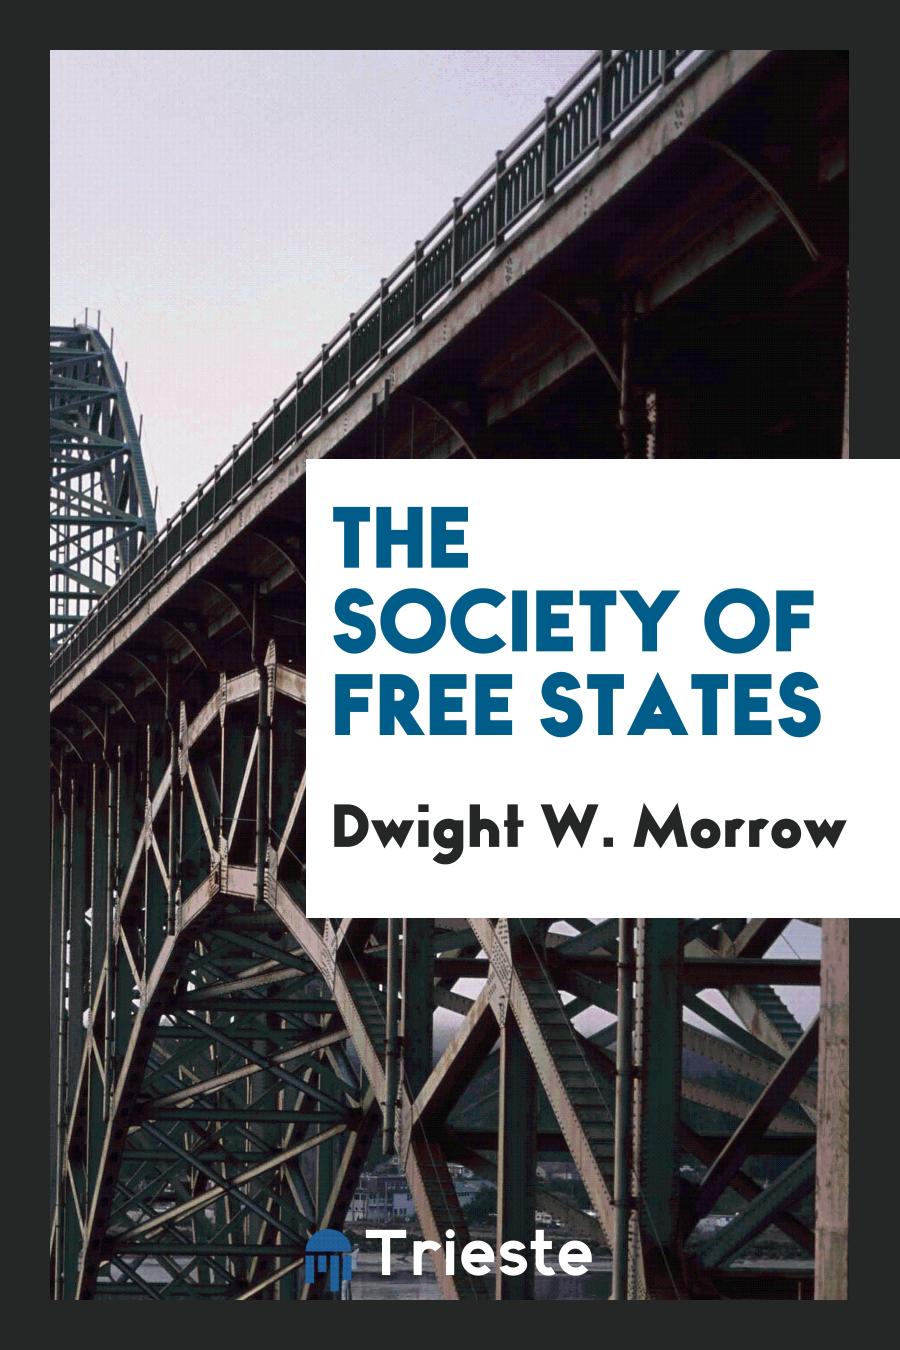 The Society of Free States